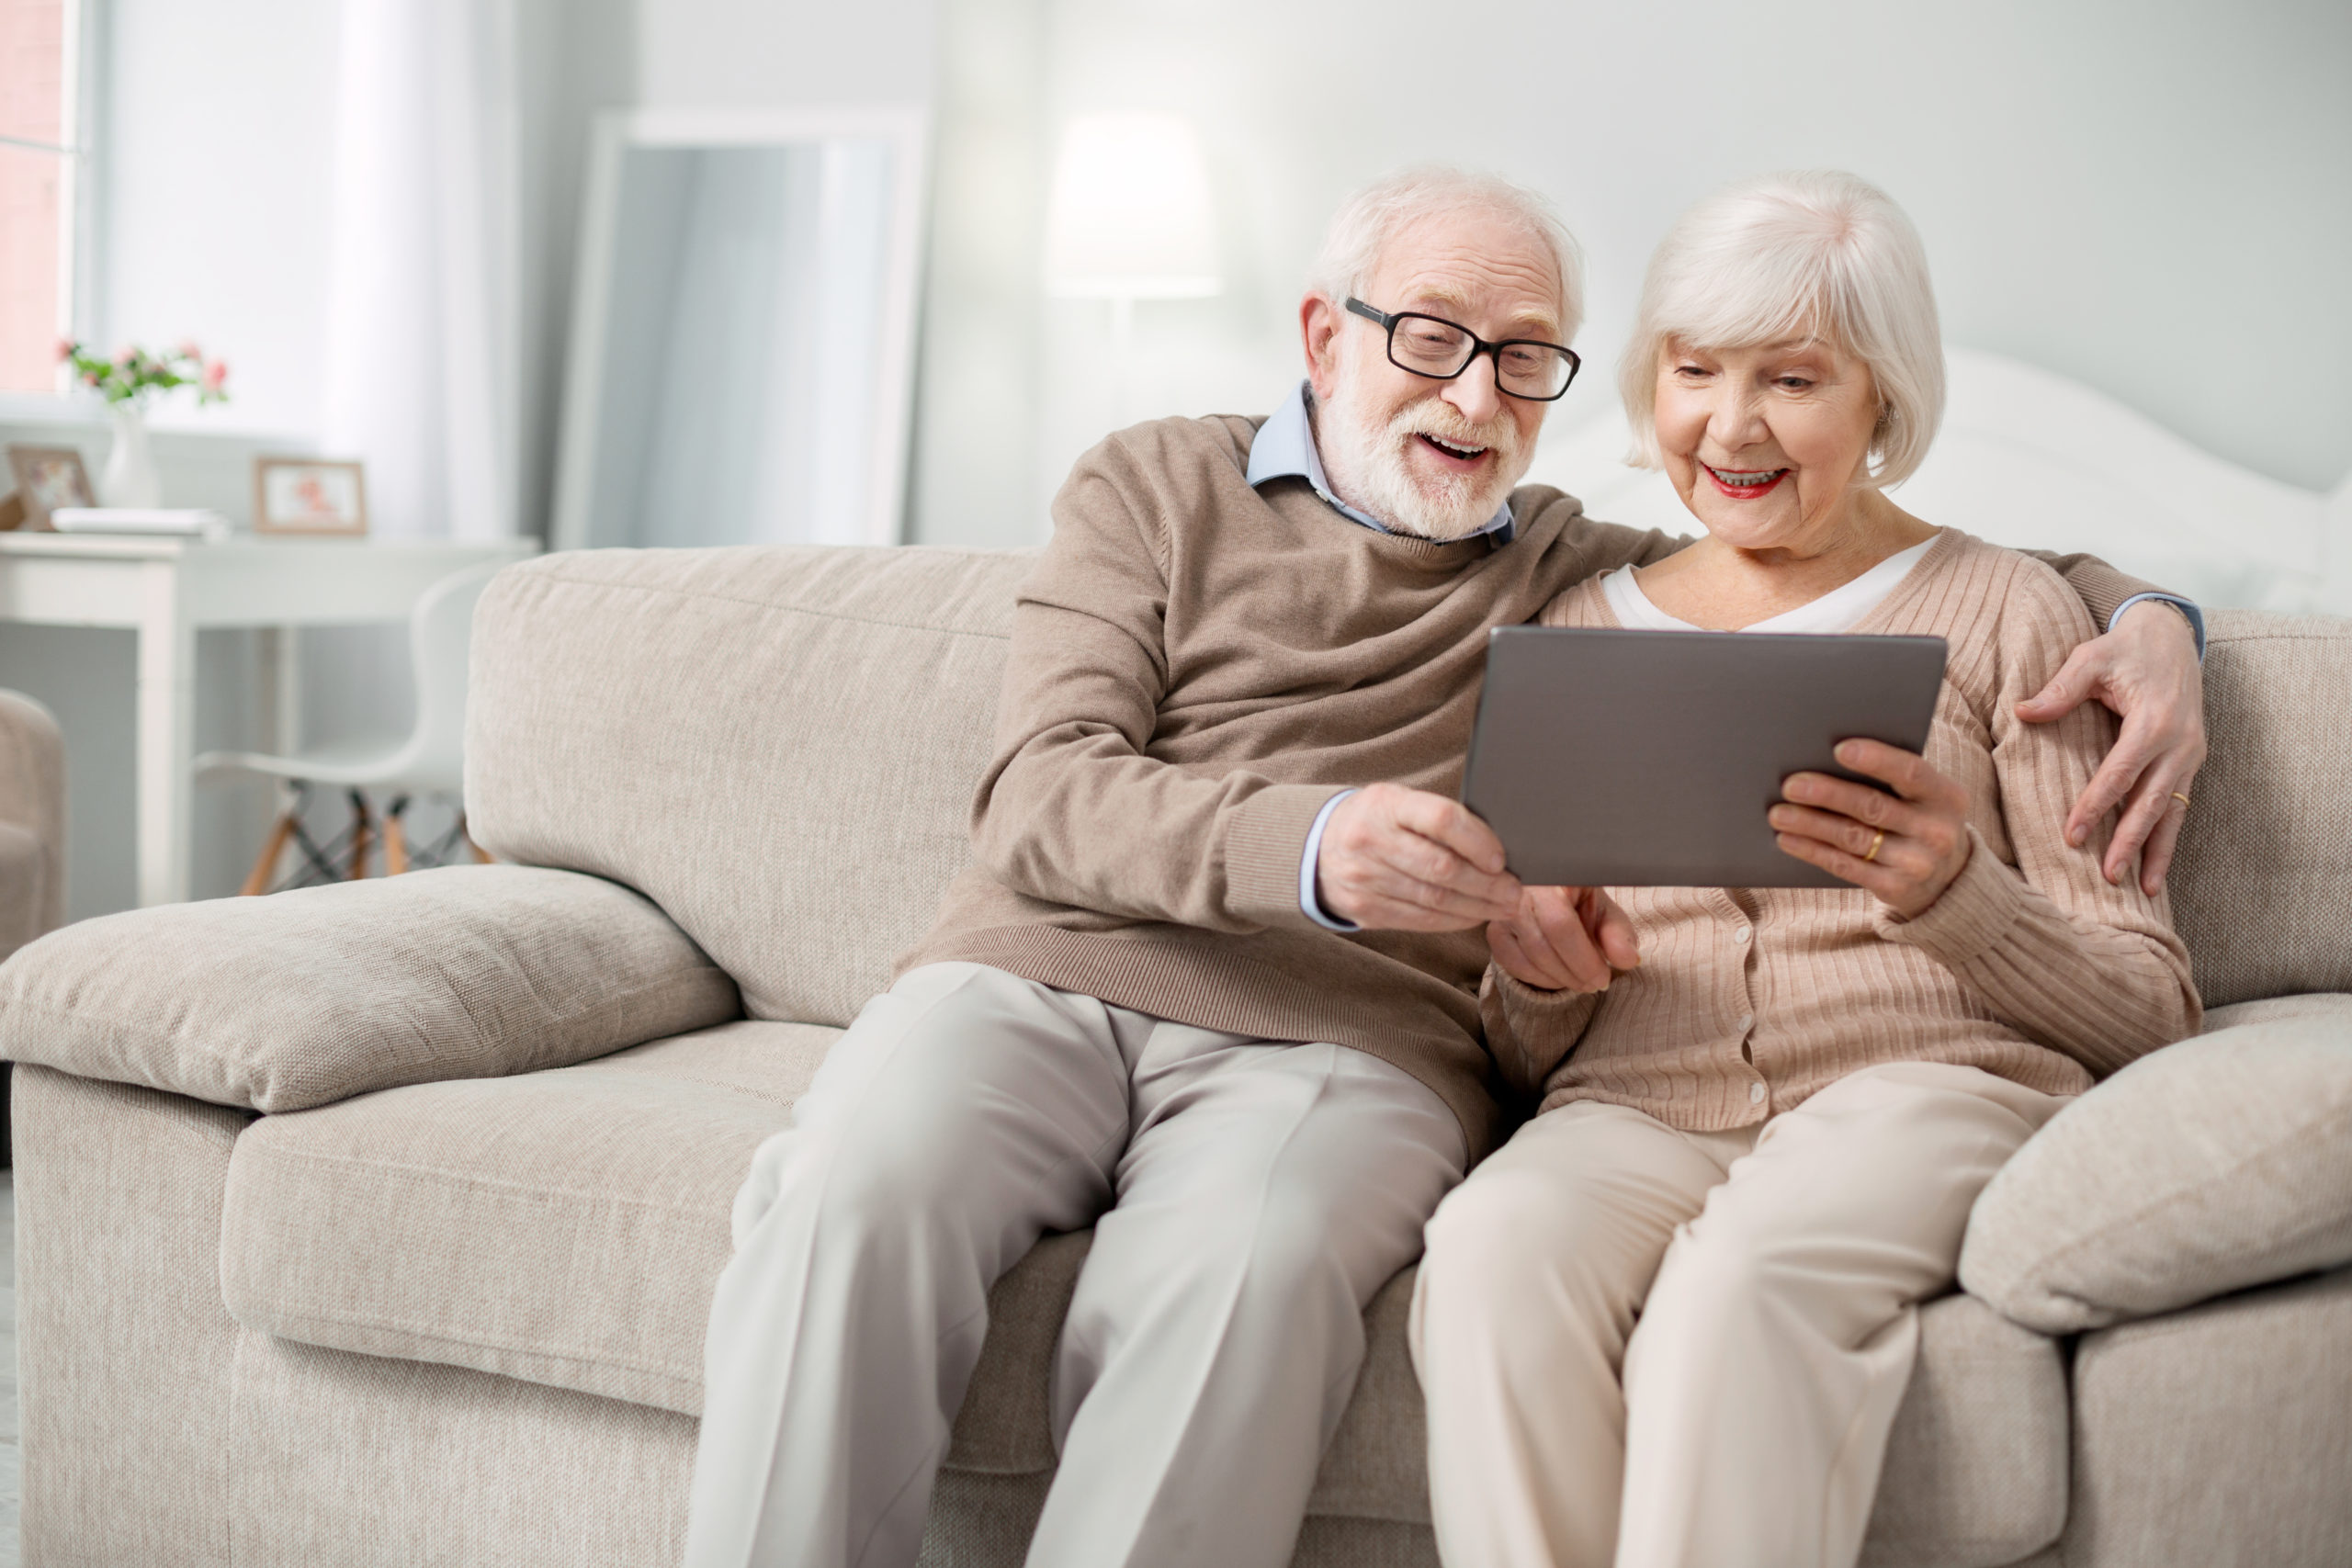 Modern device. Joyful aged people smiling while looking at the tablet screen